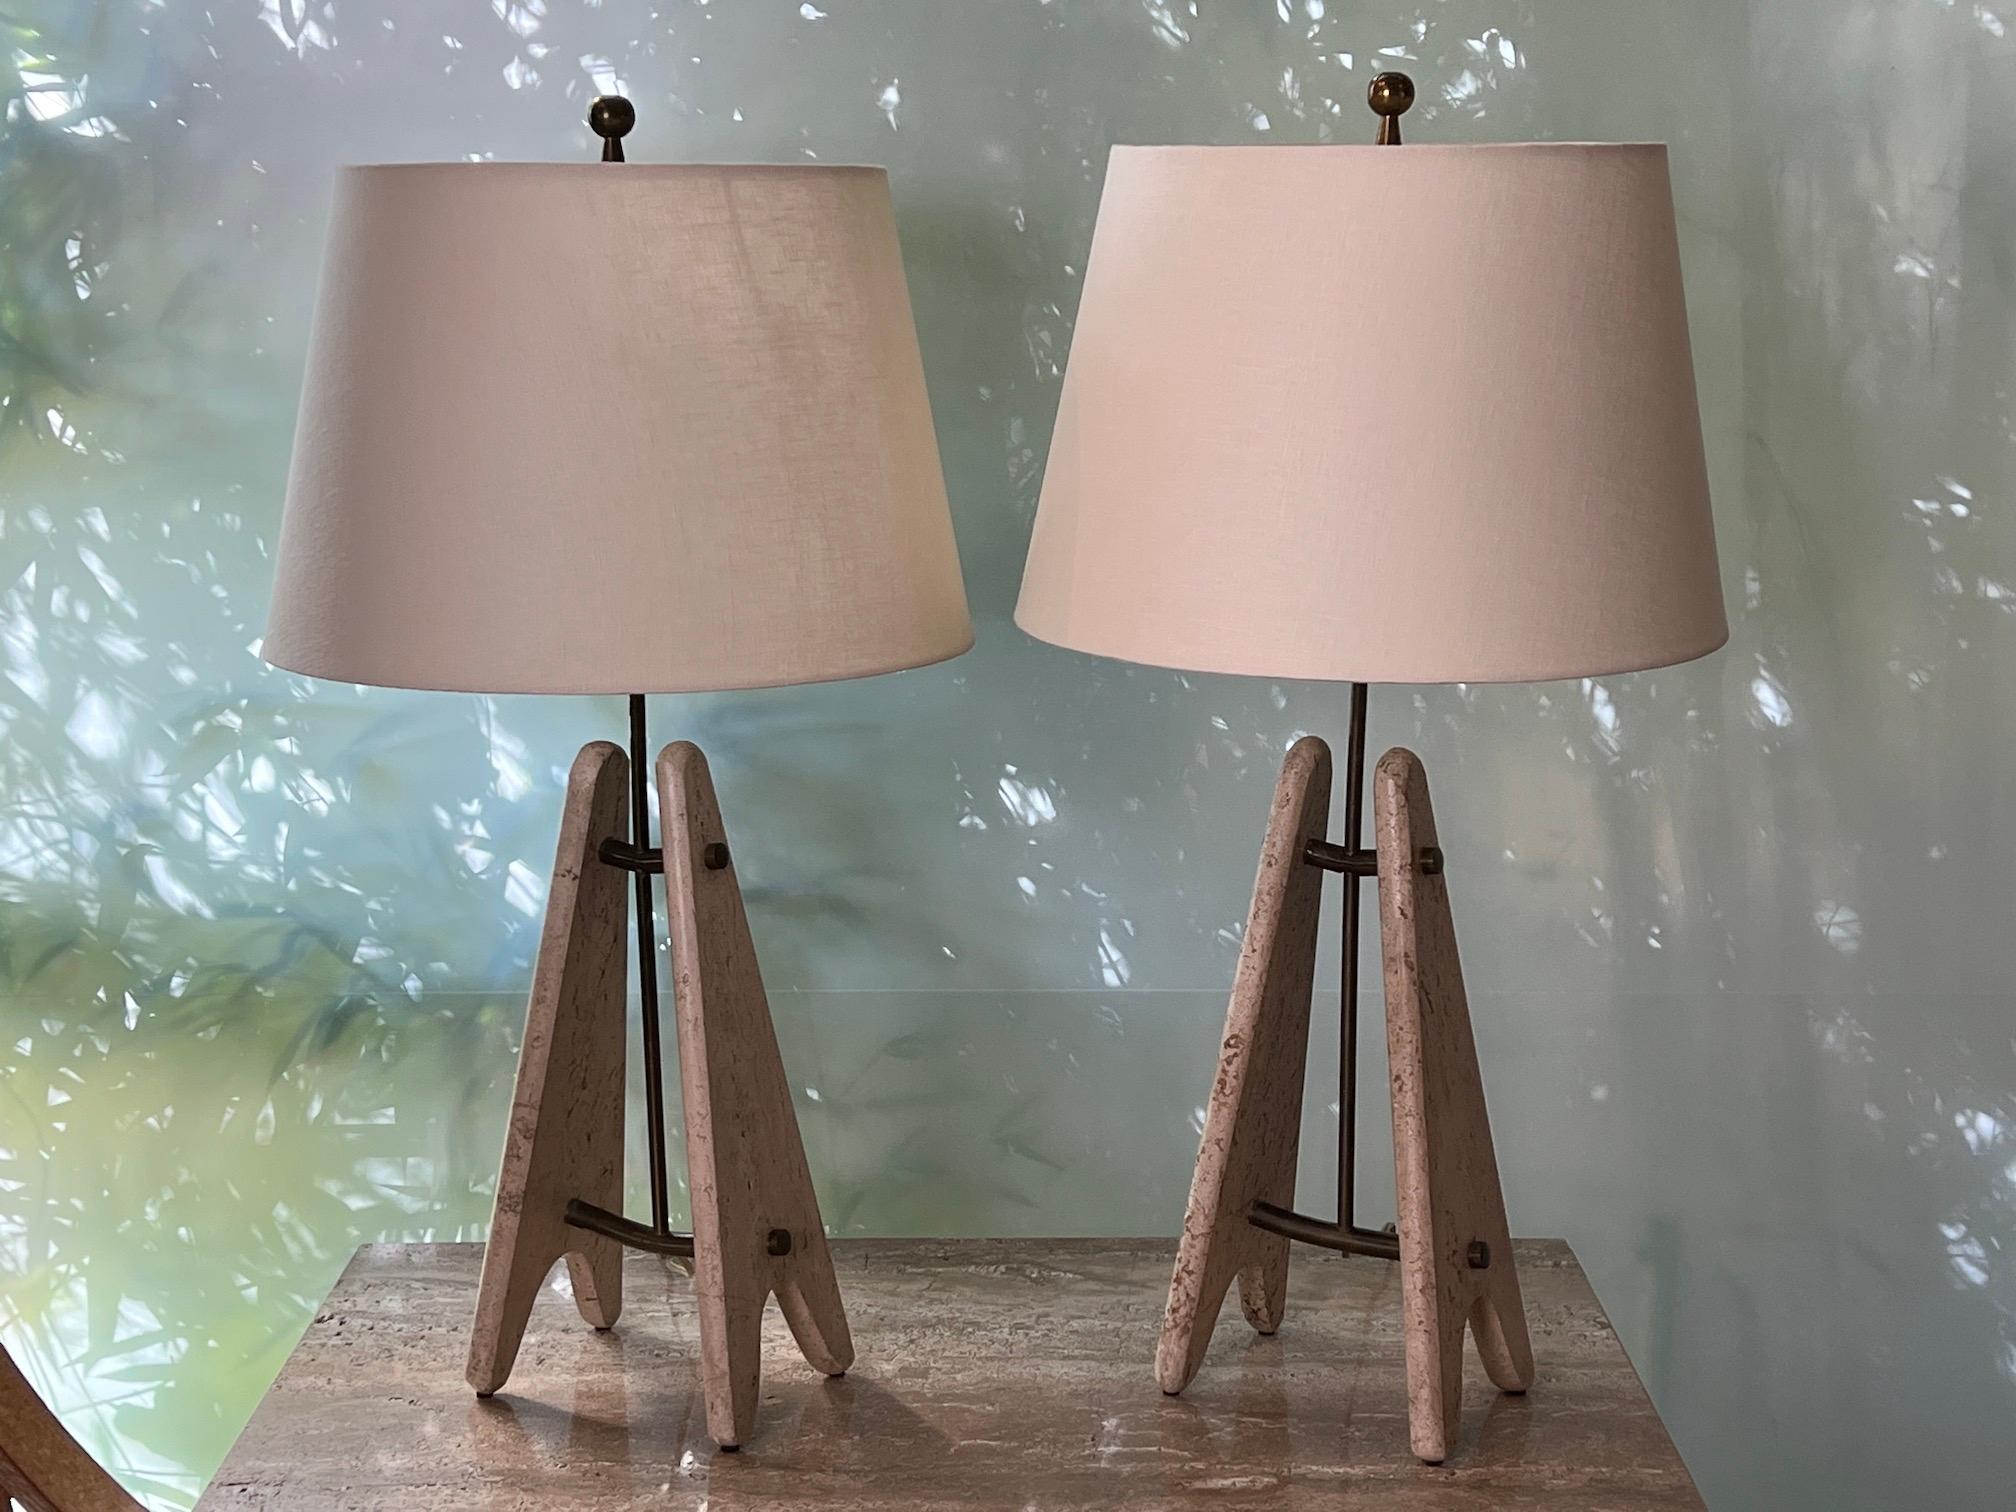 A sculptural pair of travertine and brass table lamps. 
Travertine measures 8